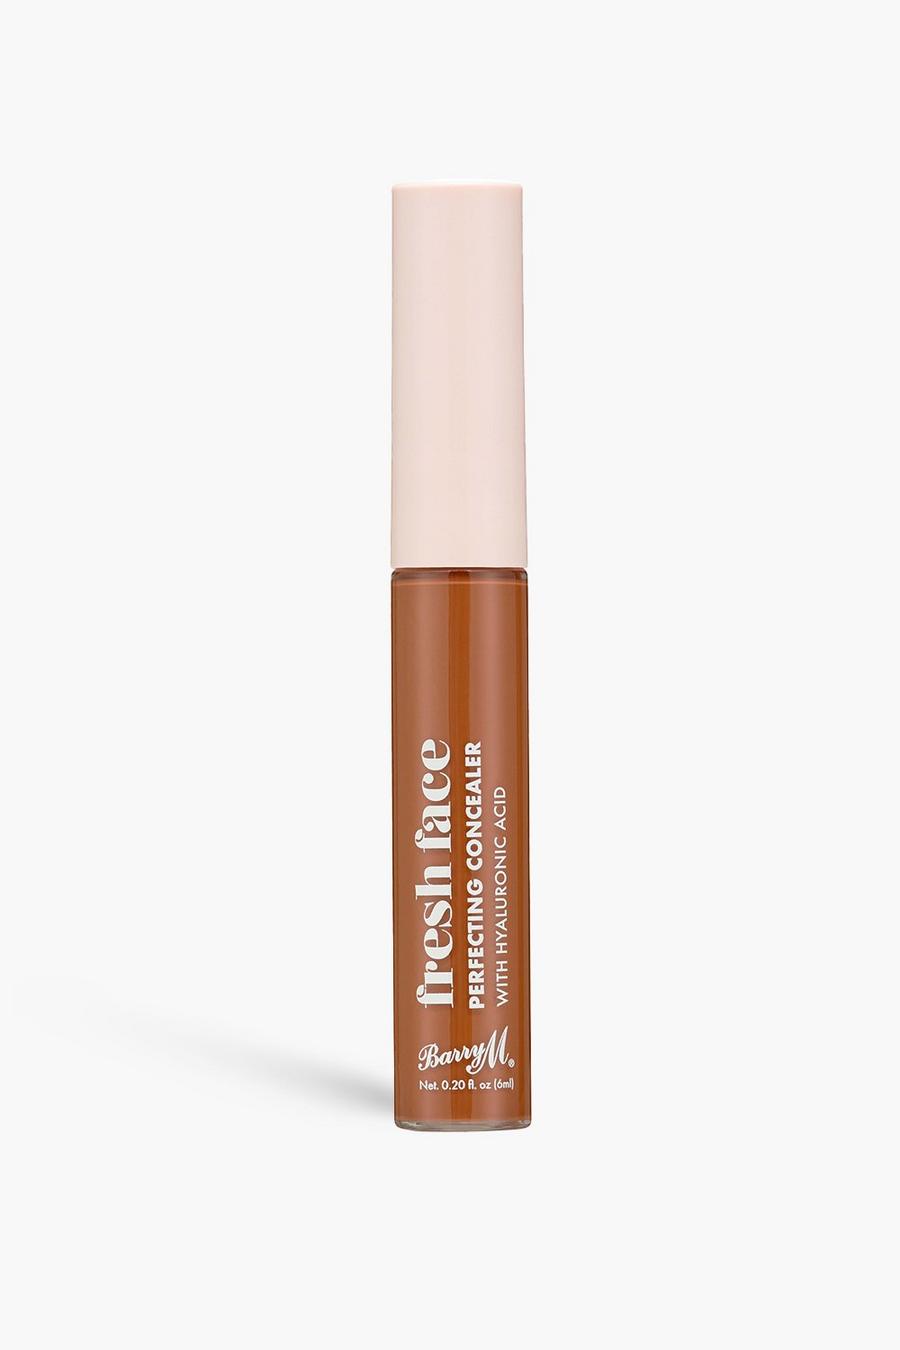 Brown Barry M Fresh Face Perfecting Concealer 17